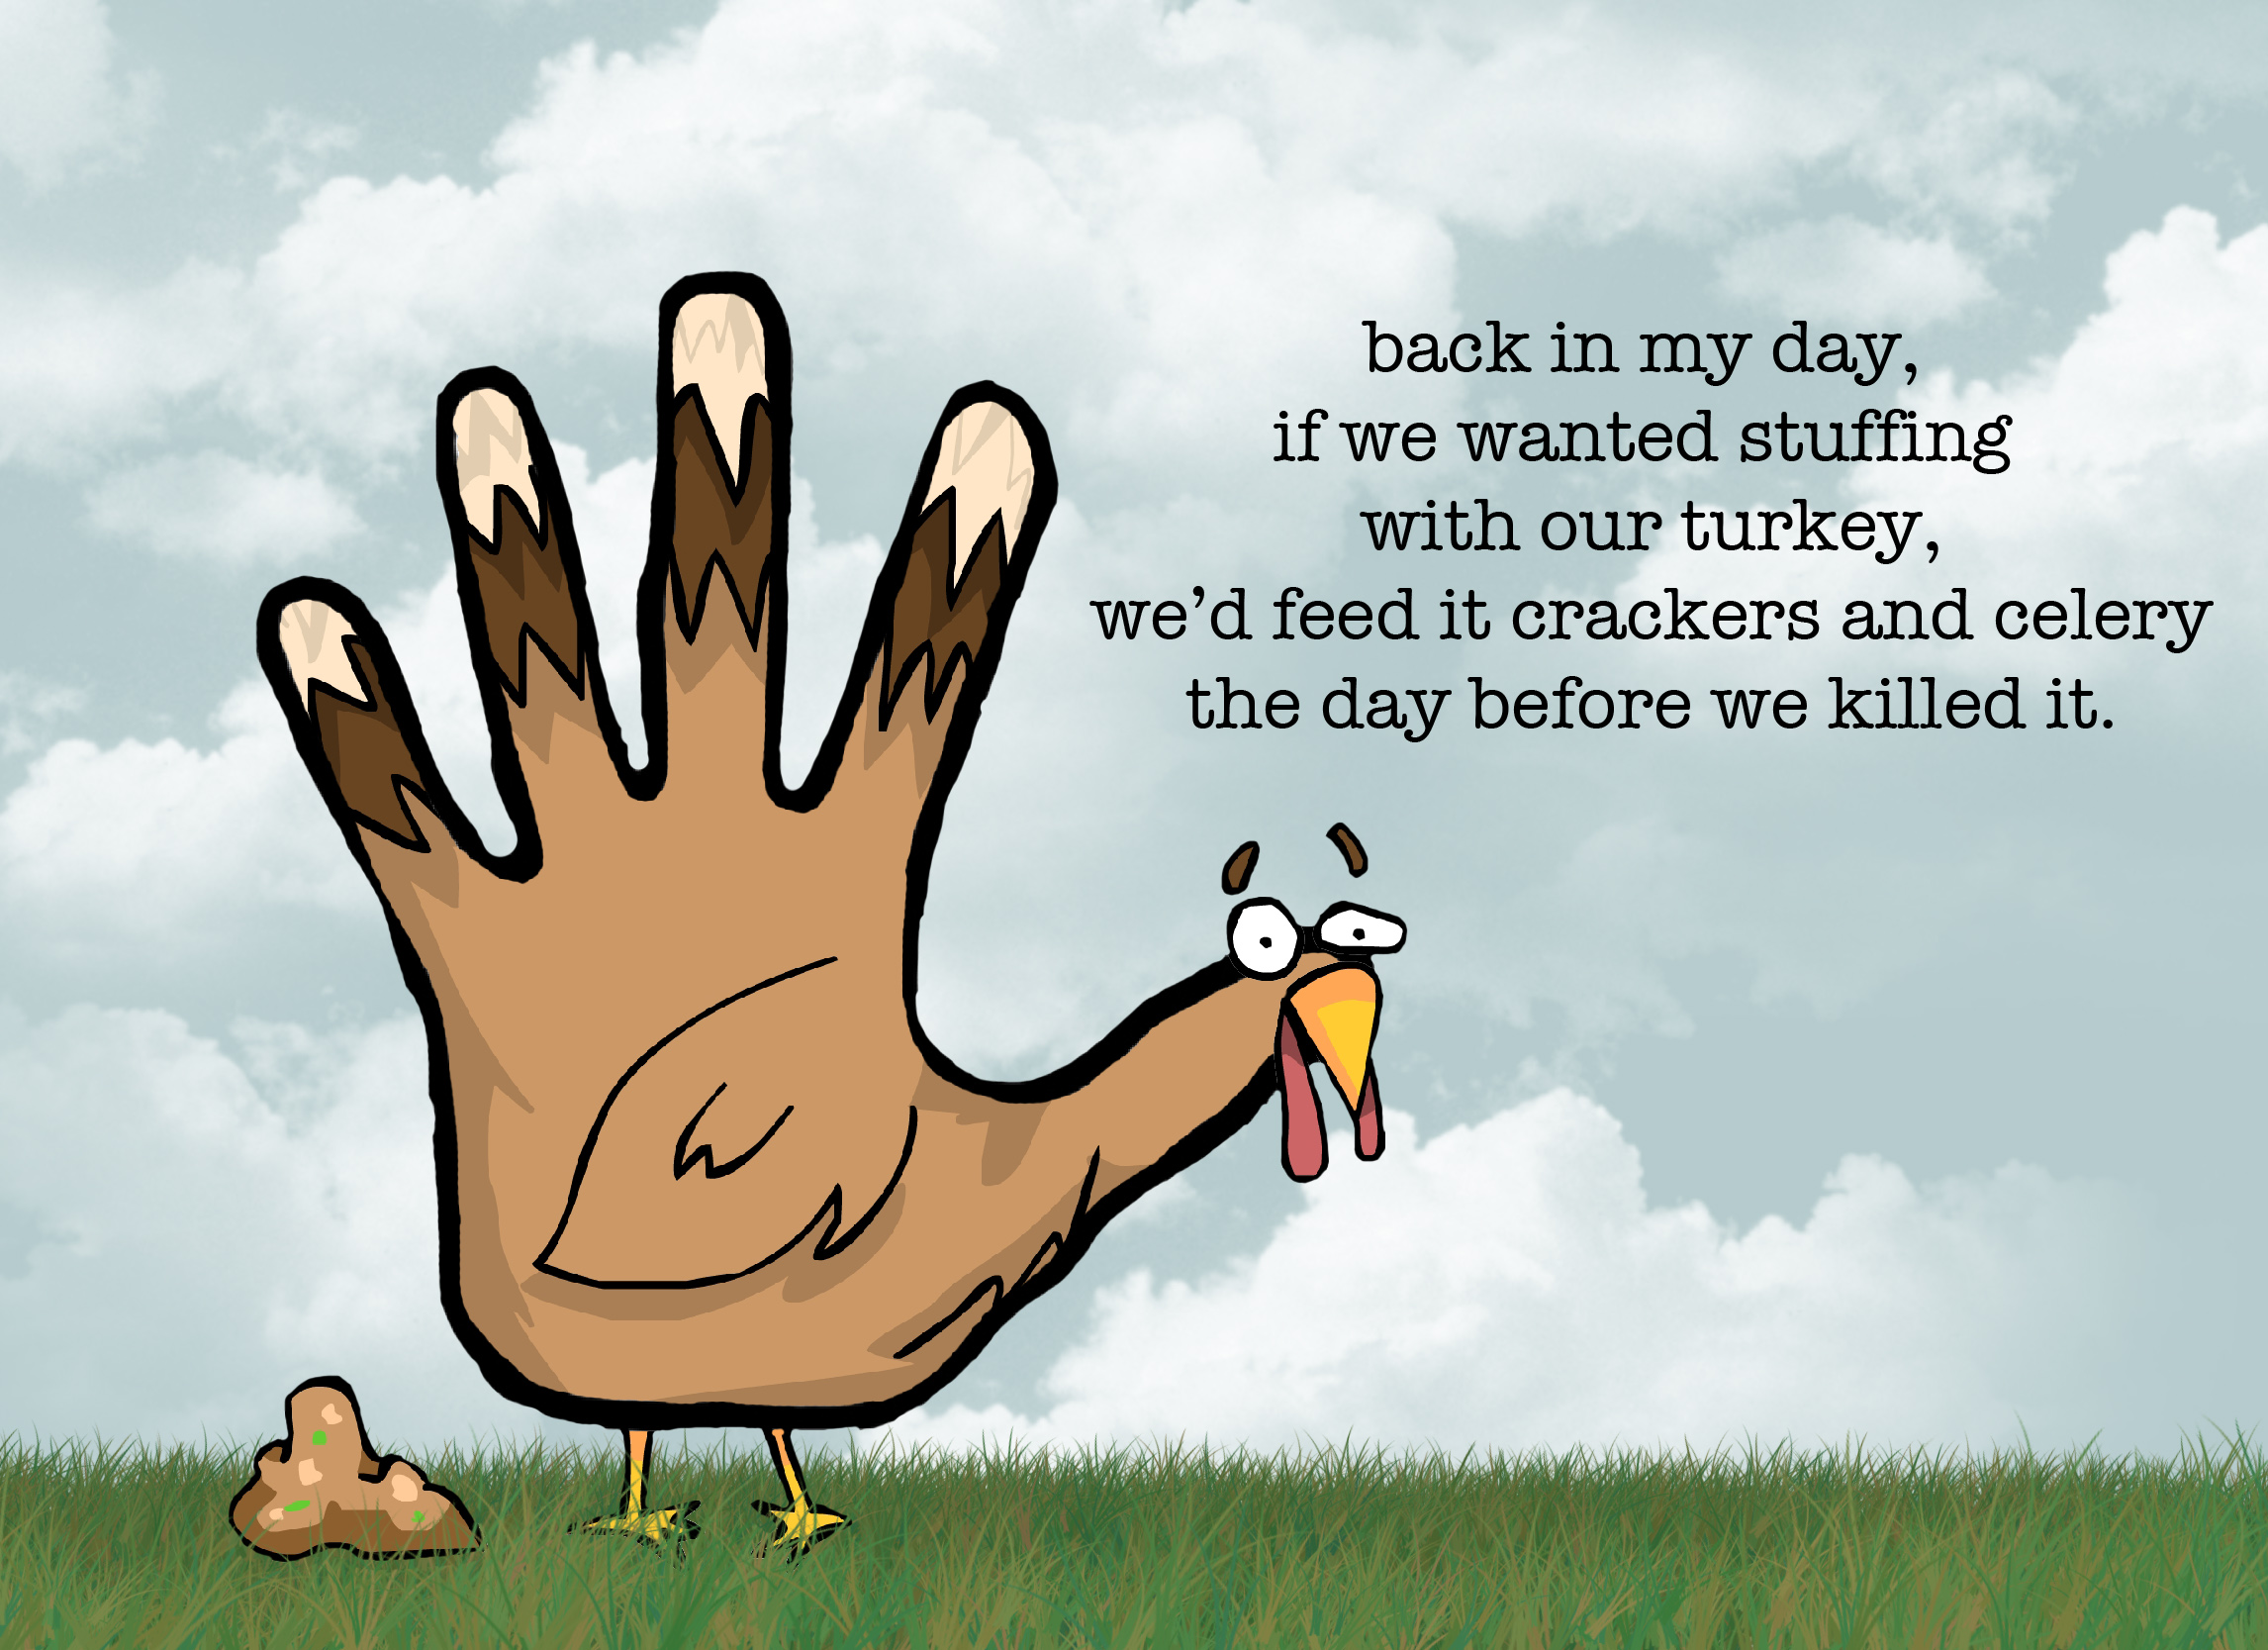 cartoon - back in my day, if we wanted stuffing with our turkey, we'd feed it crackers and celery the day before we killed it.